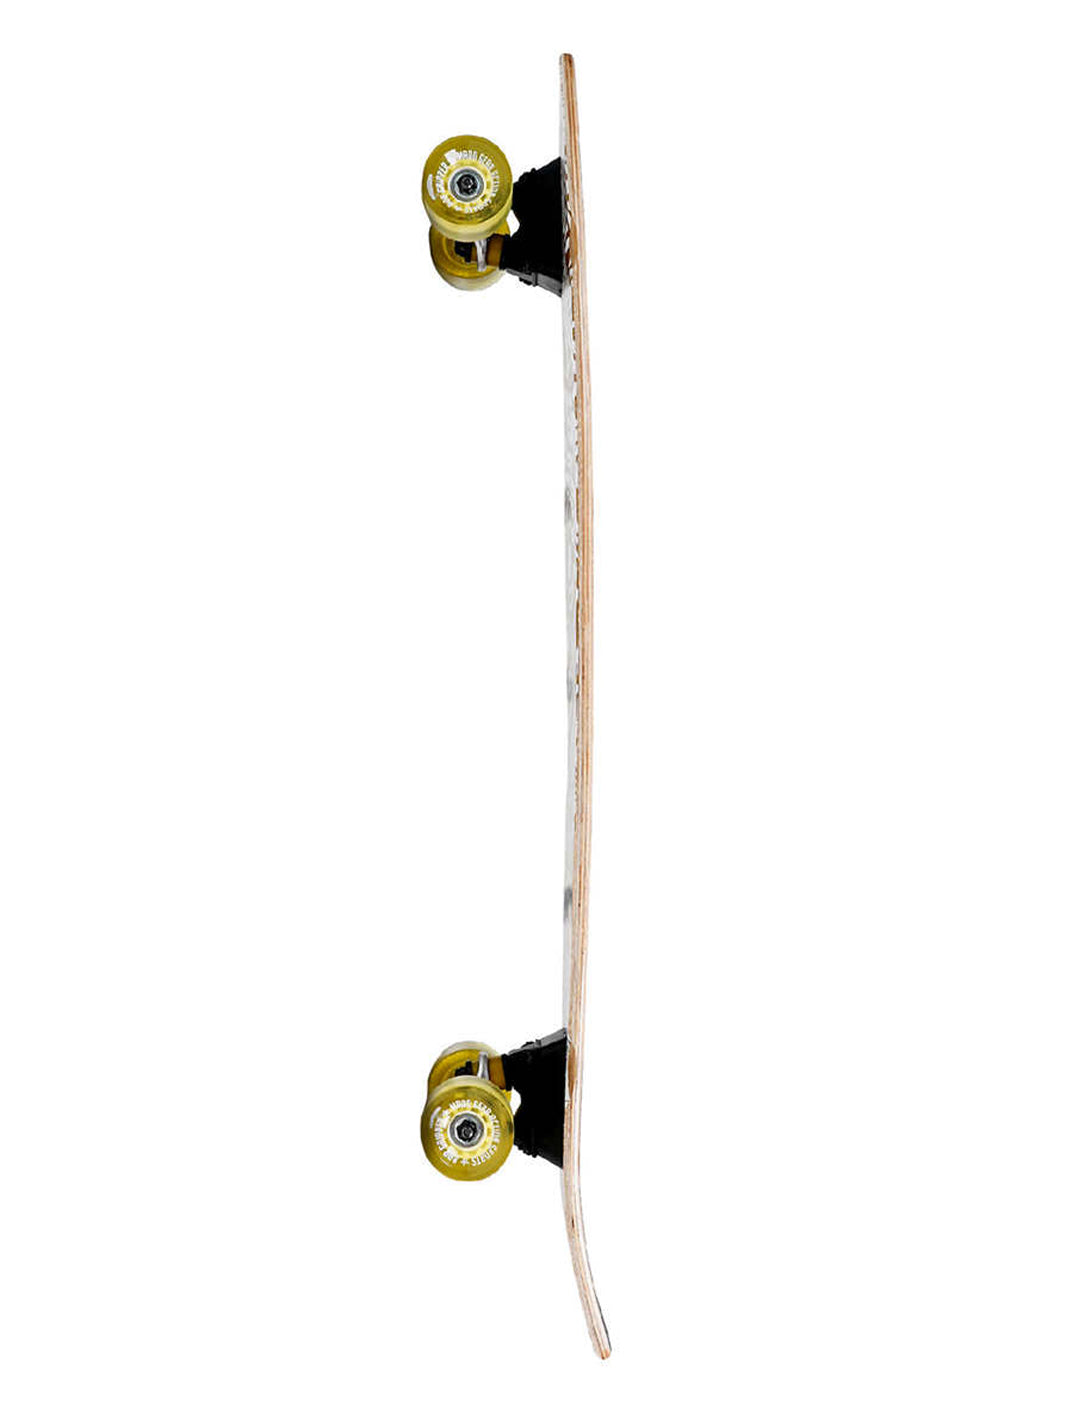 Madd Gear Complete Longboard 36 Inch Cruiser Smooth Kids Adults Surf Cruiser